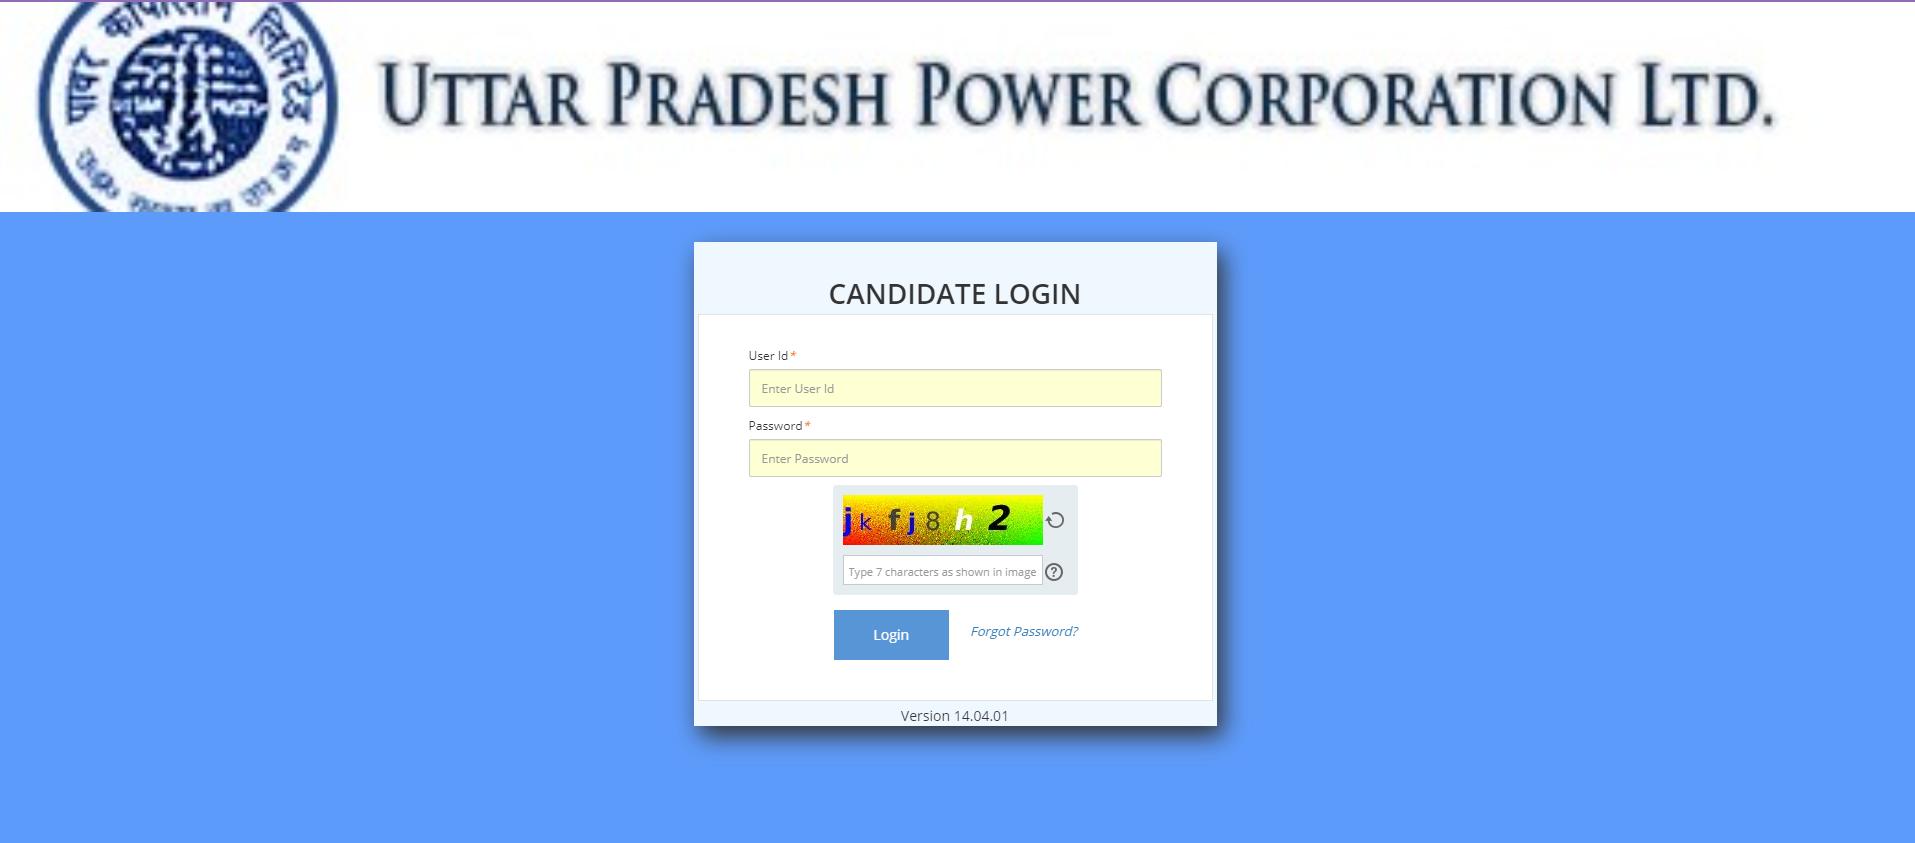 Get direct link to download UPPCL TG2 Admit Card 2023 here